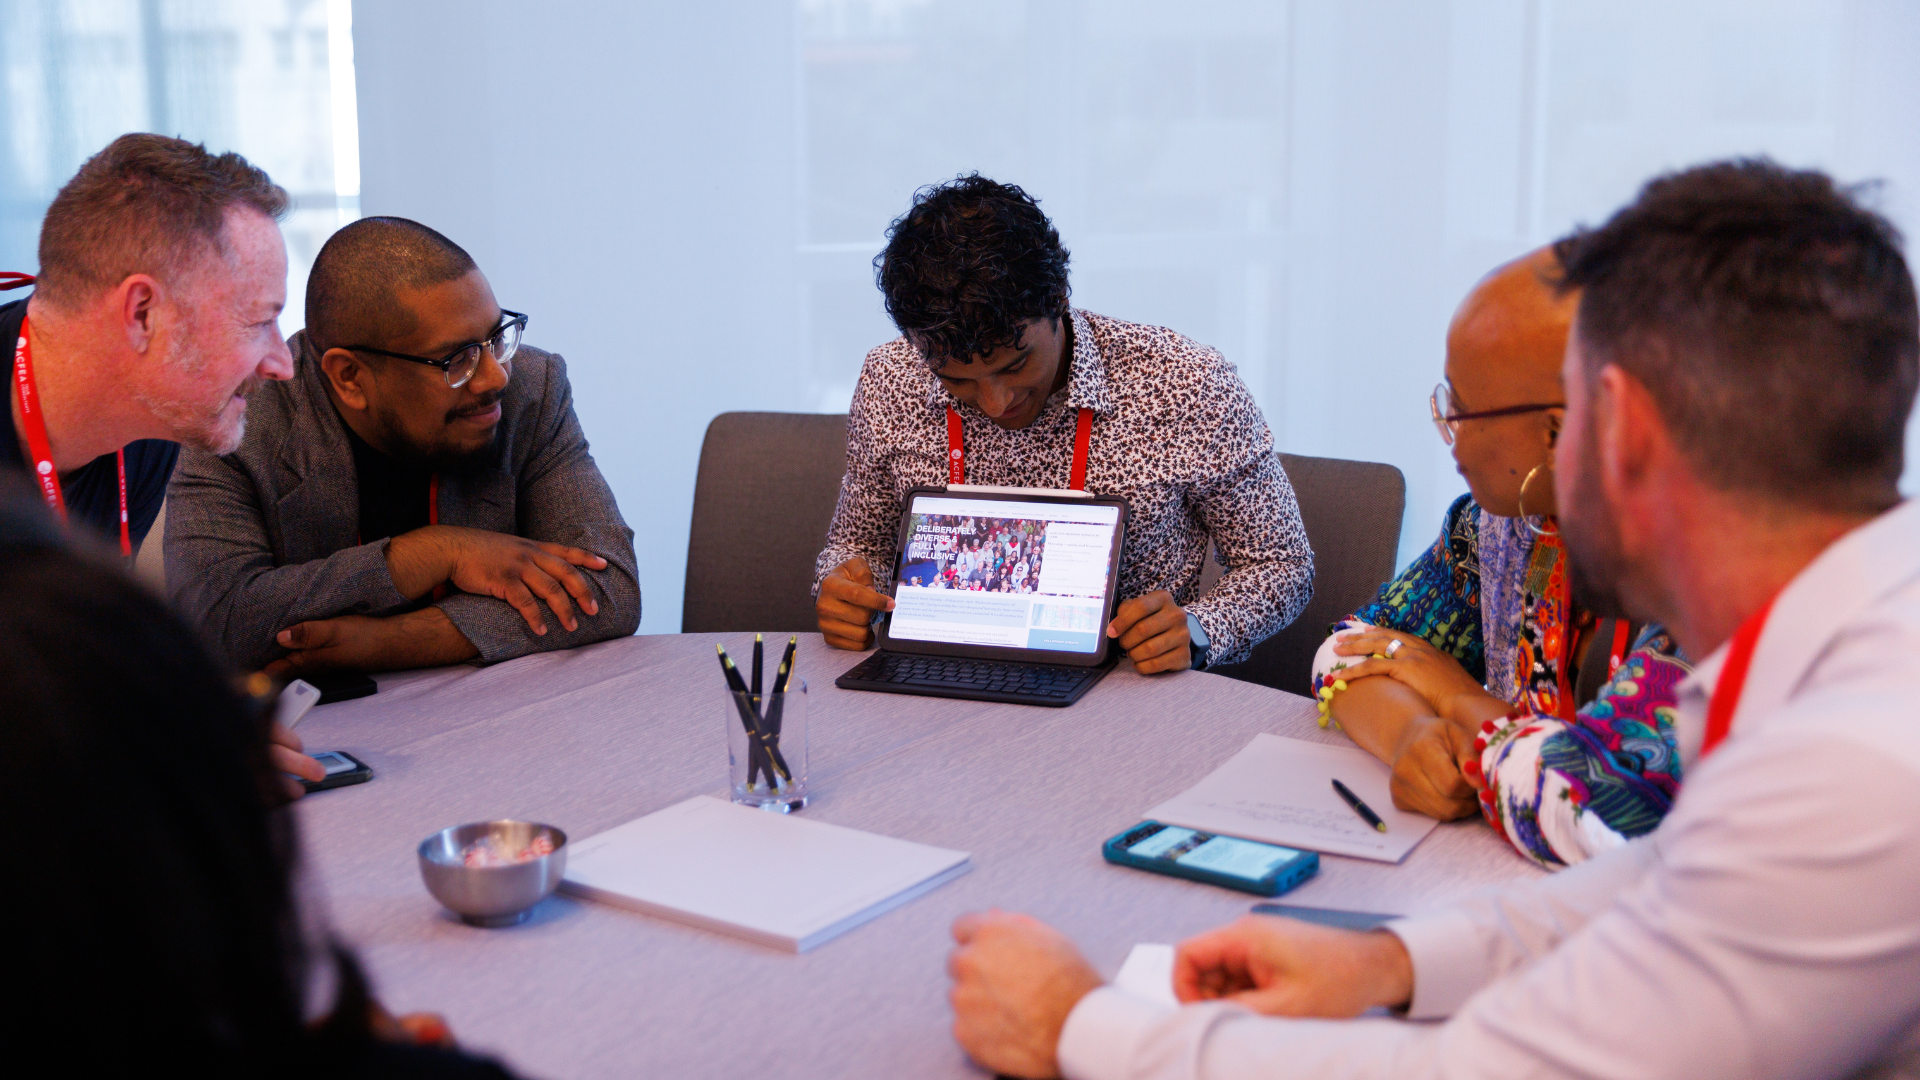 A group of five diverse adults sitting around a table looking toward a man who is holding an iPad with a conference schedule on the screen, facing the camera.